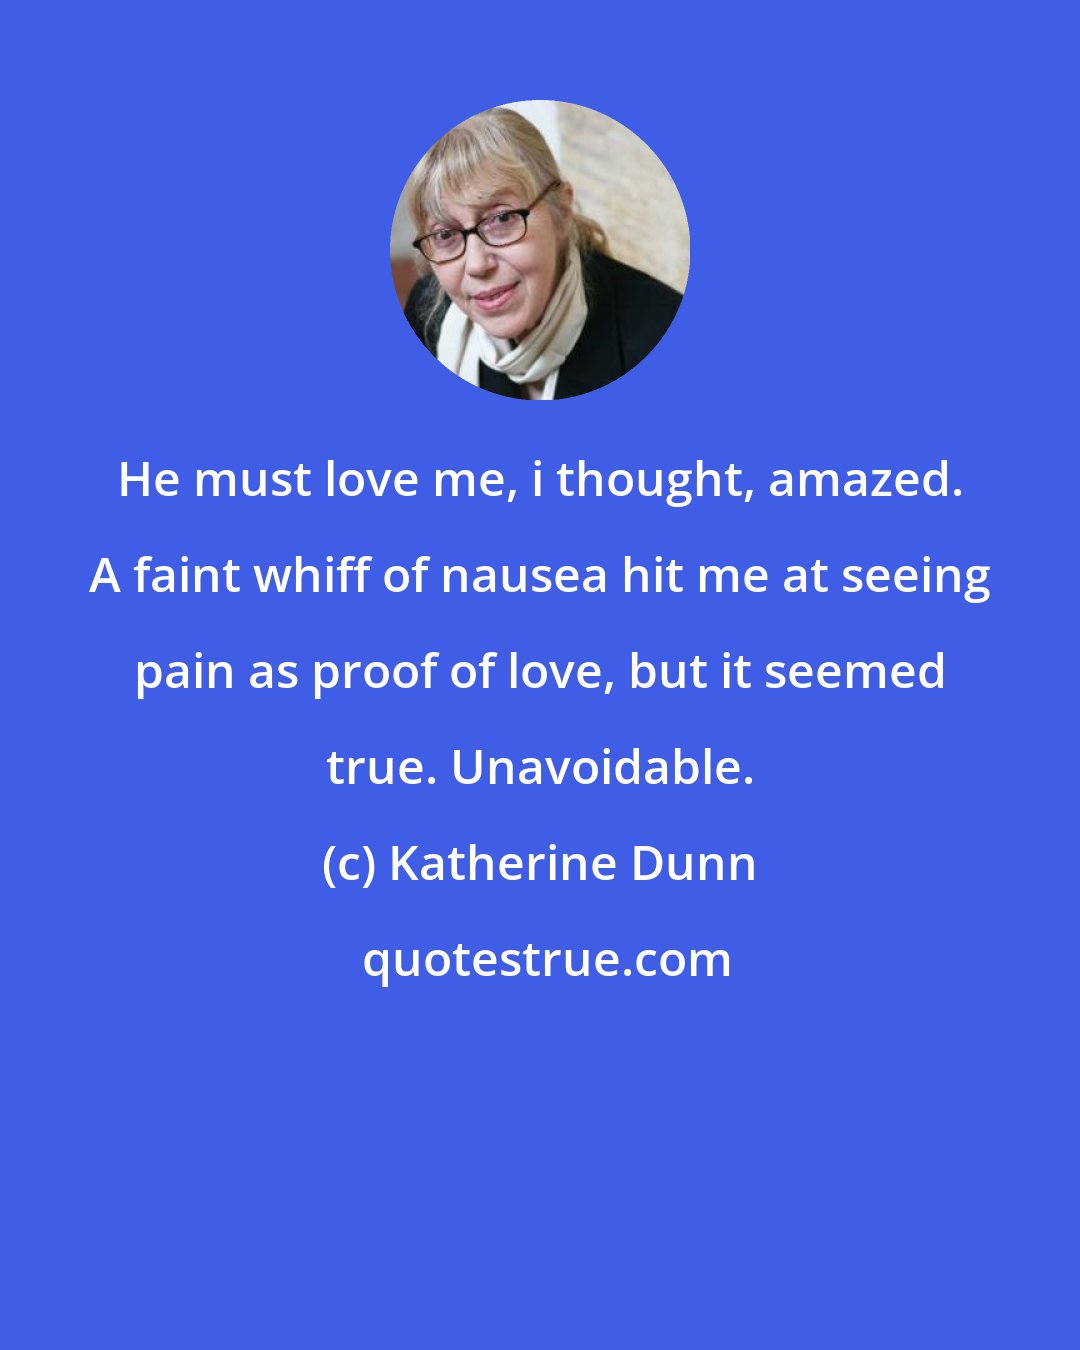 Katherine Dunn: He must love me, i thought, amazed. A faint whiff of nausea hit me at seeing pain as proof of love, but it seemed true. Unavoidable.